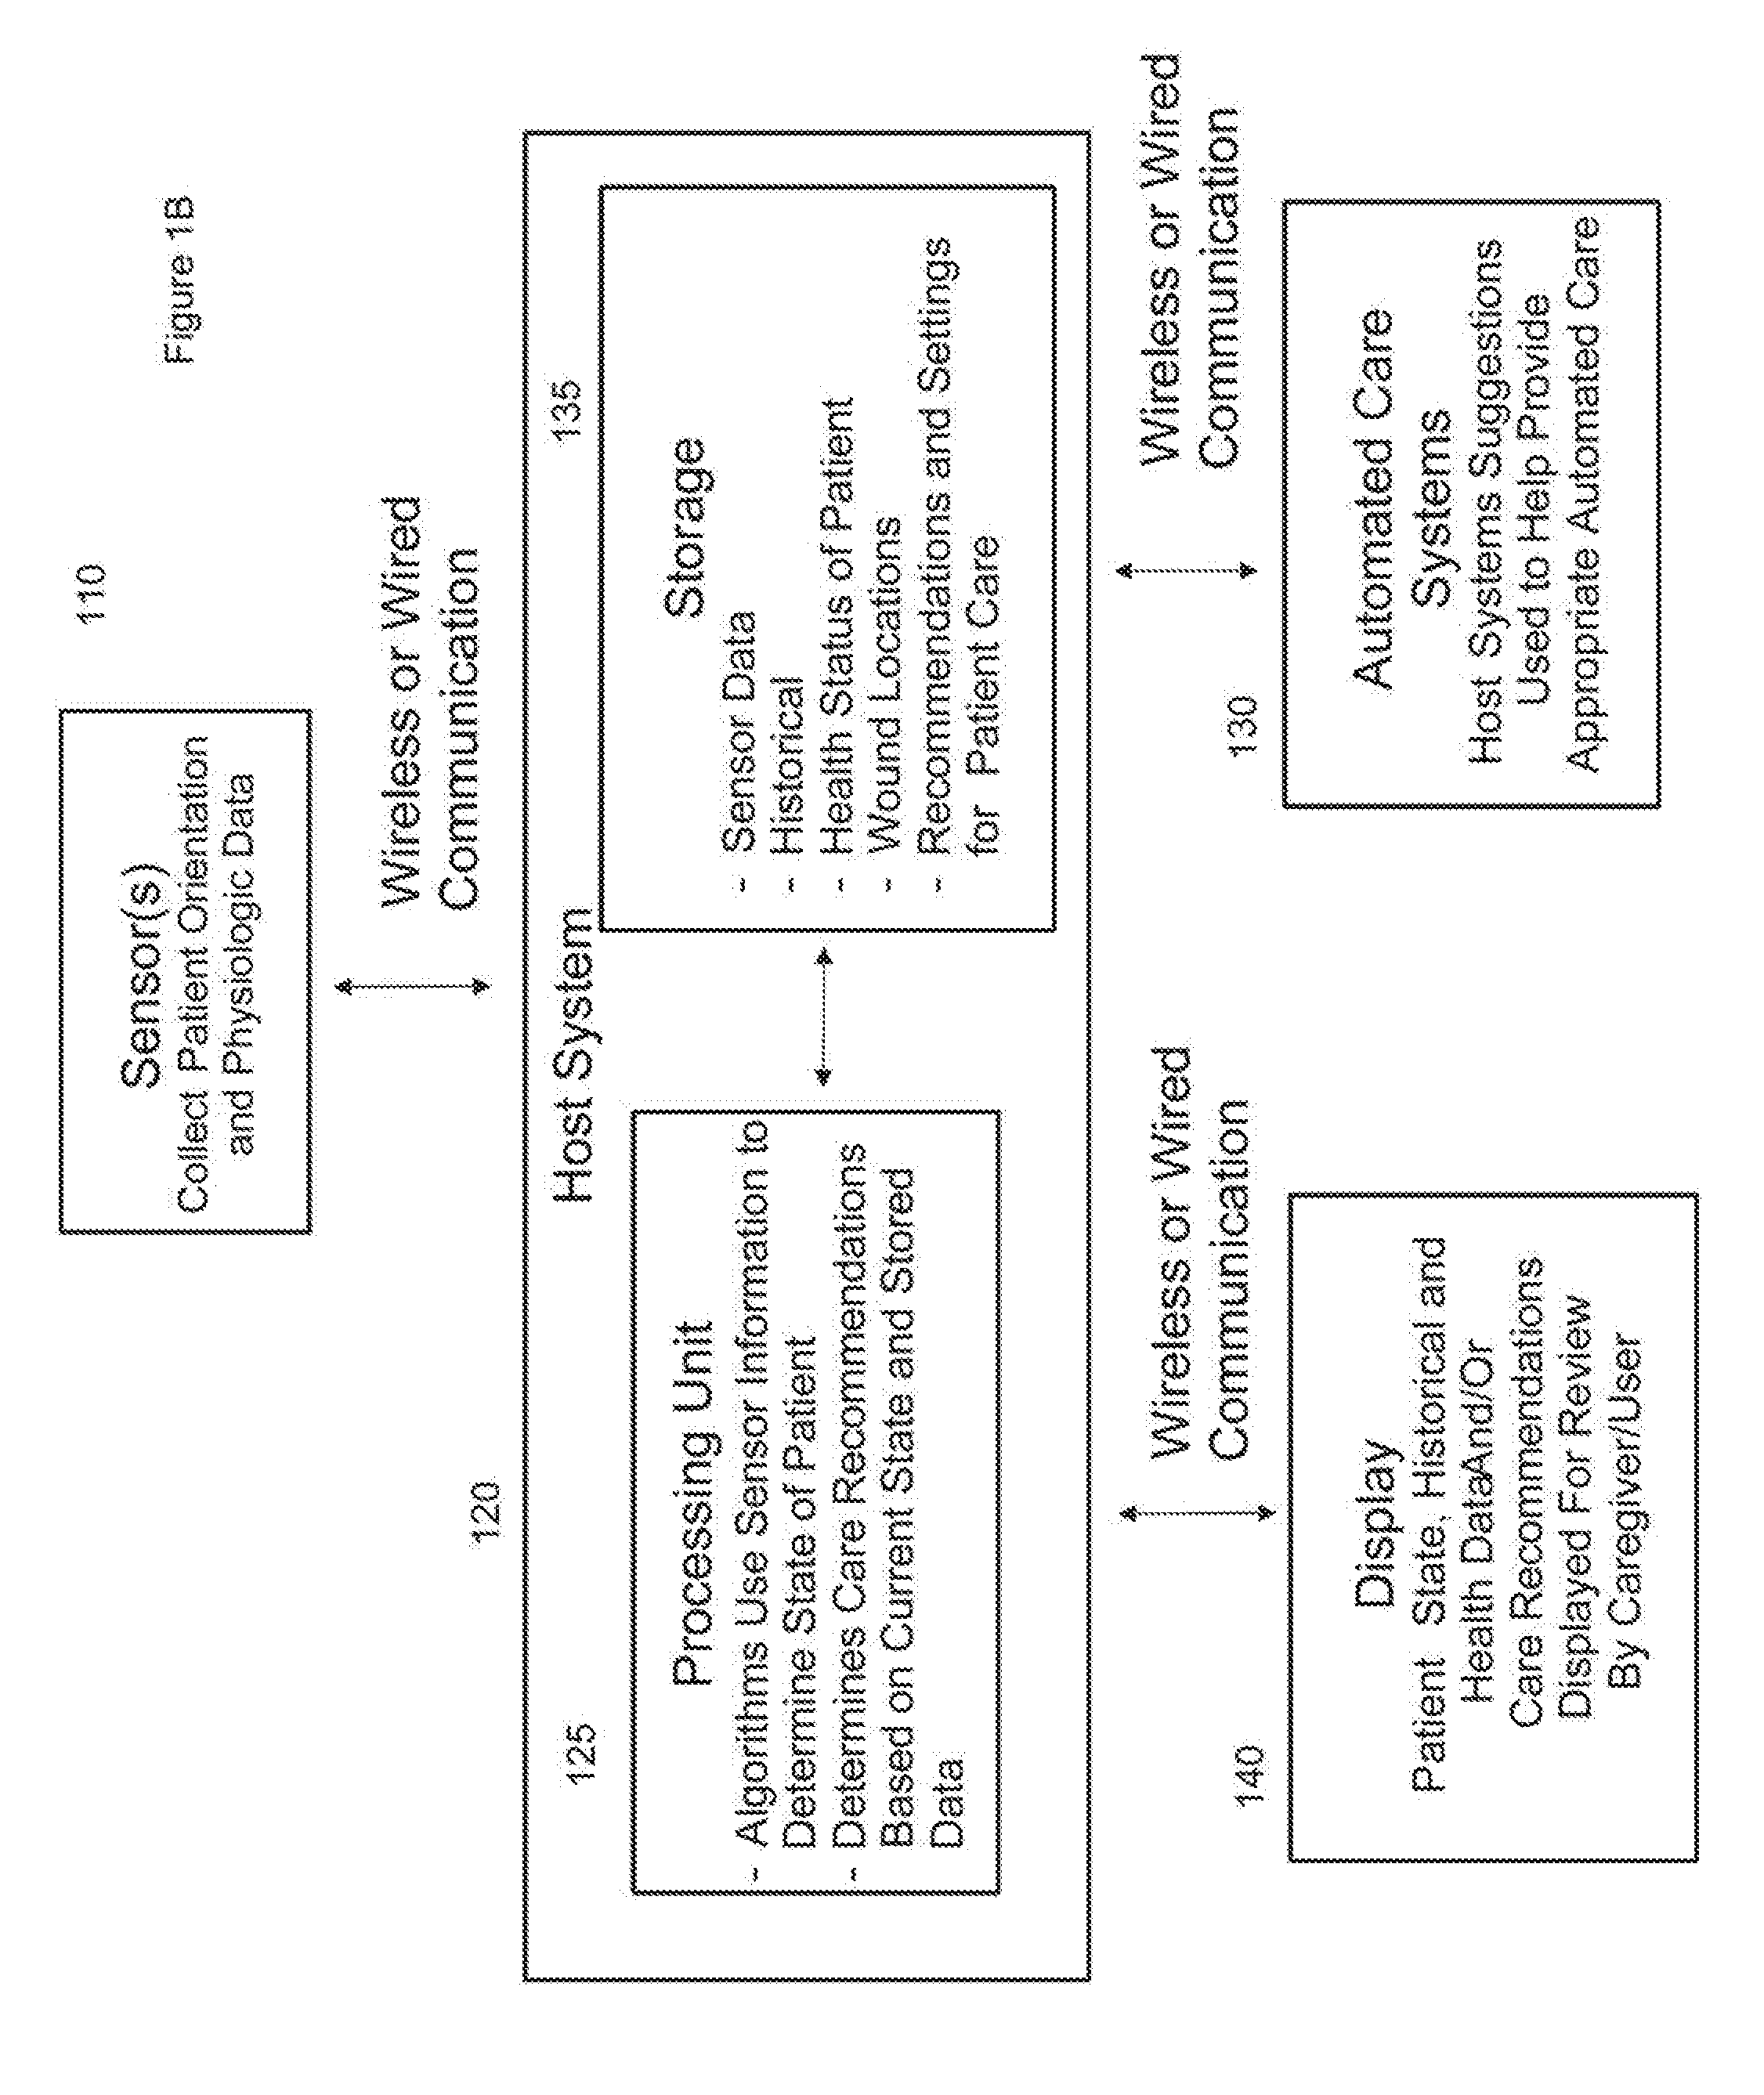 Systems, Devices and Methods for the Prevention and Treatment of Pressure Ulcers, Bed Exits, Falls, and Other Conditions